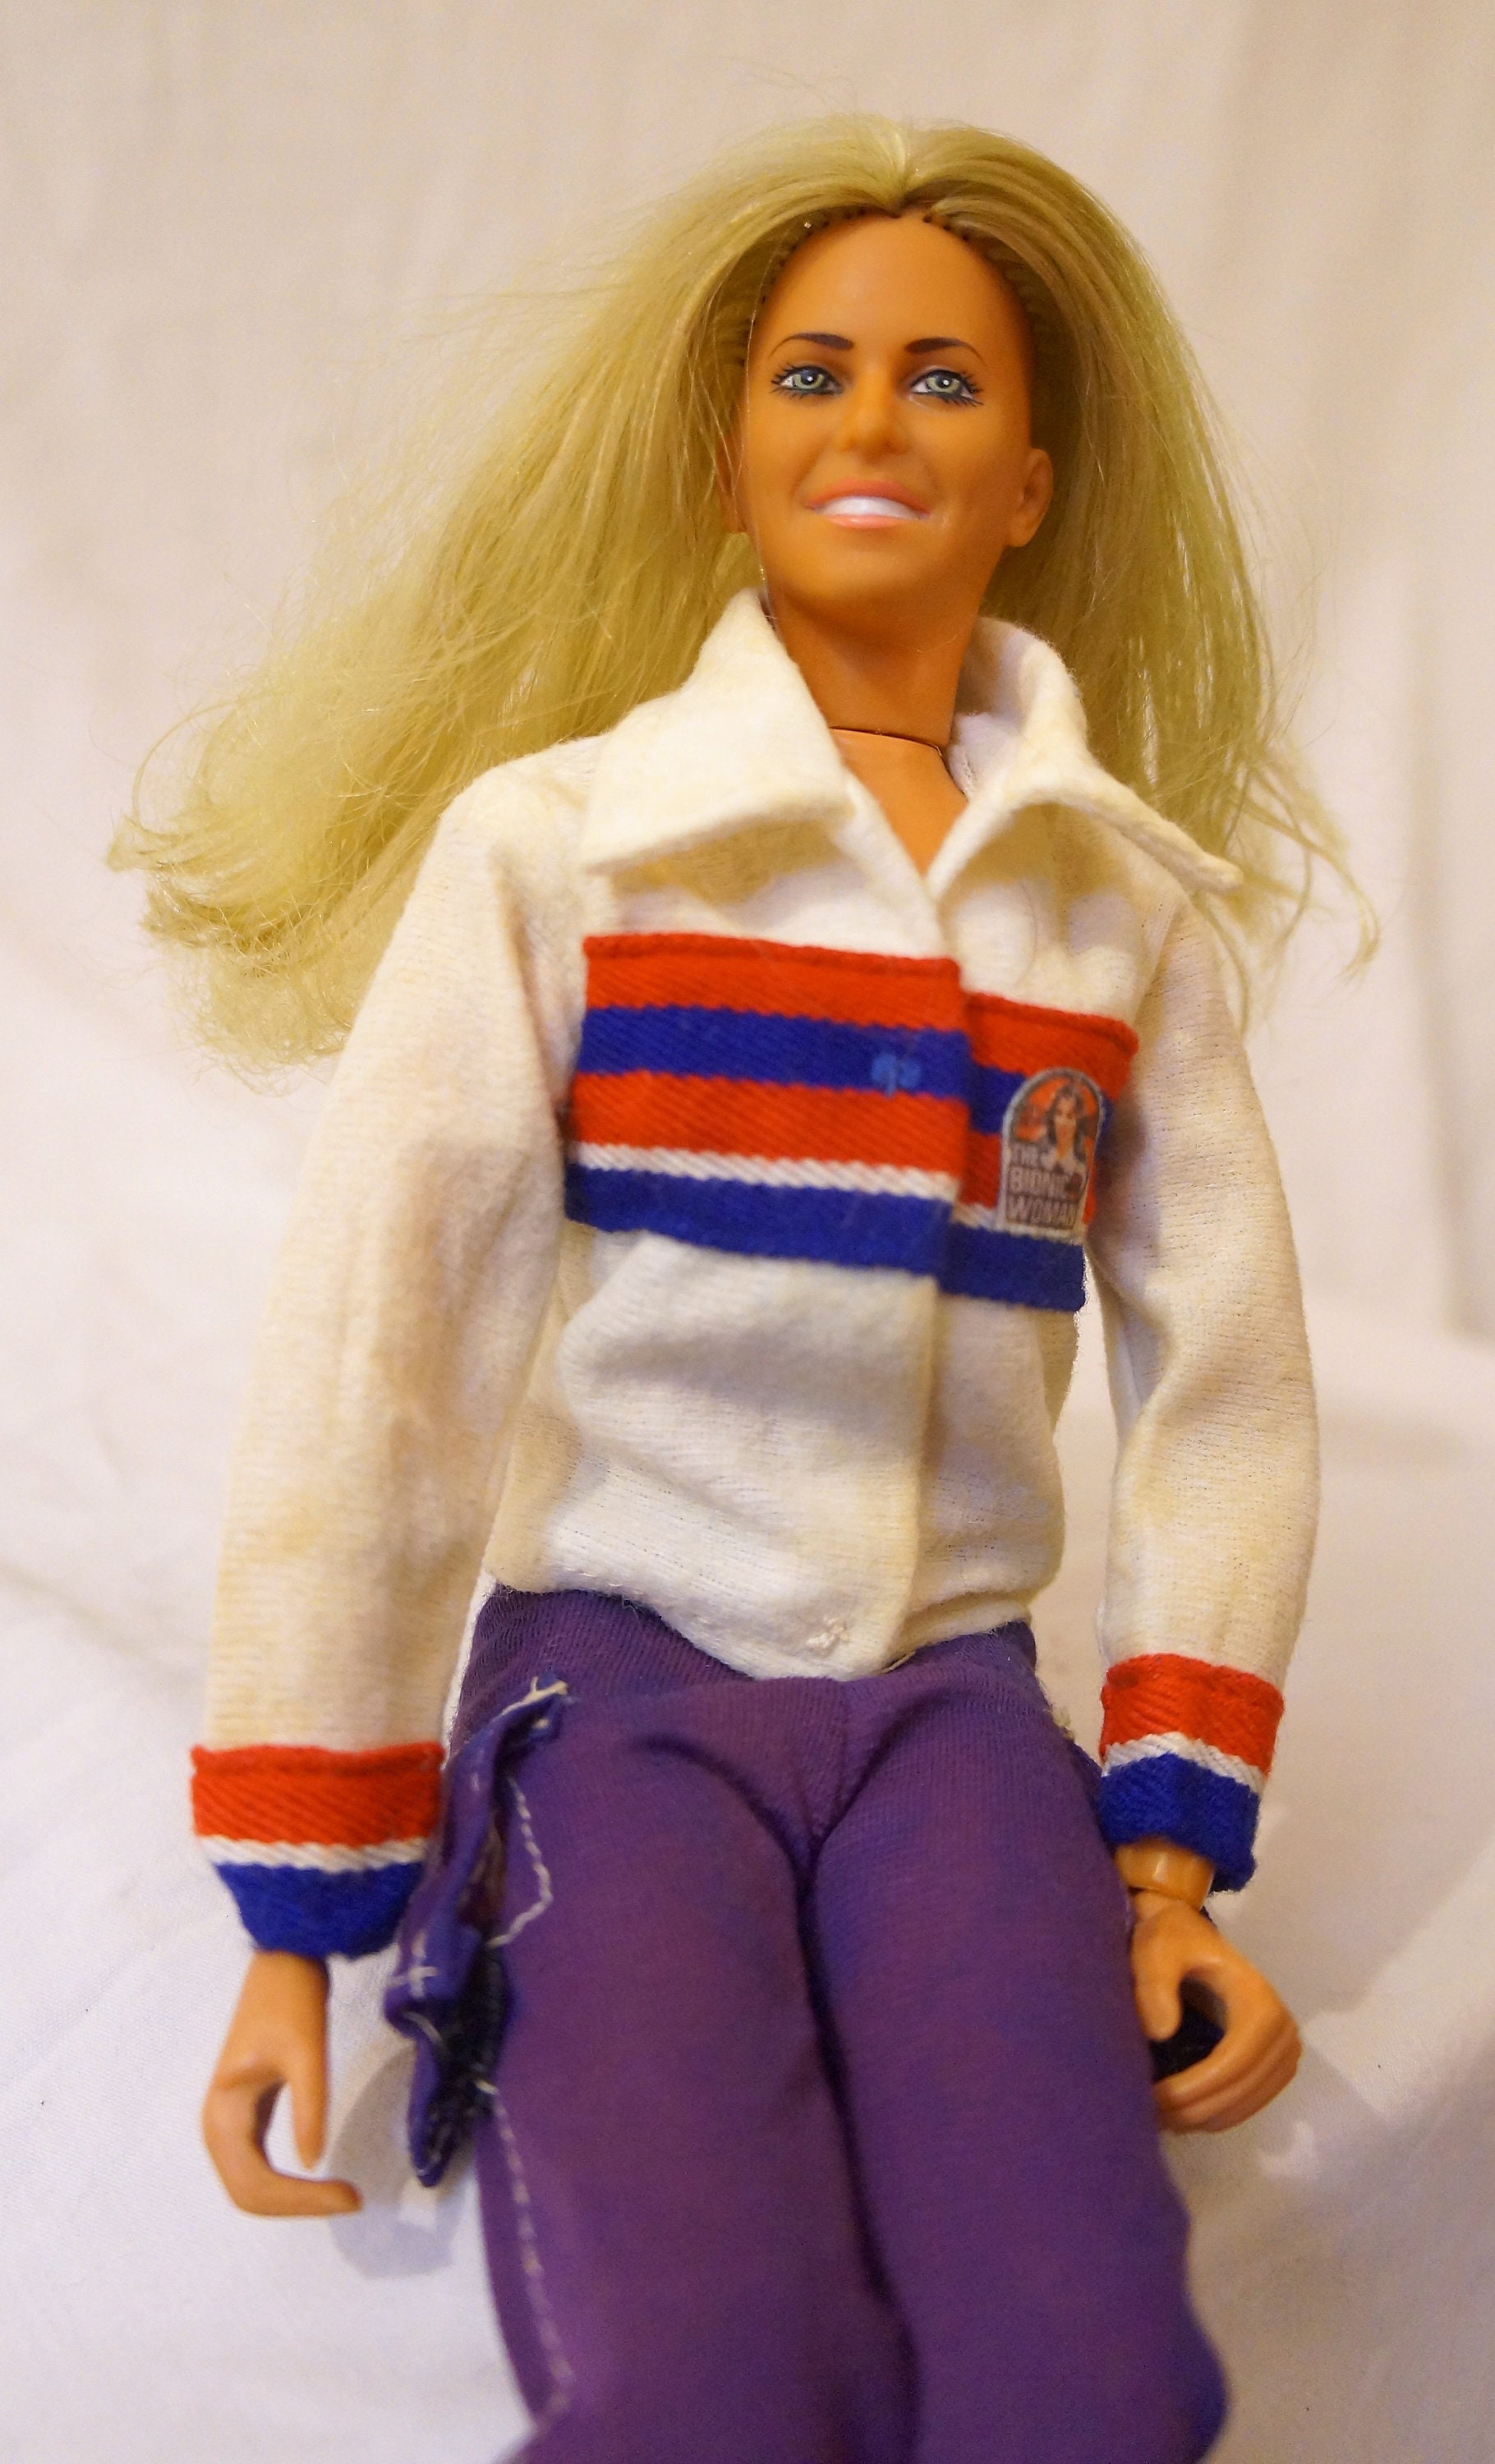 Bionic Woman Jaime Sommers Original Outfit, Purse & Accessories Kenner Doll  1976 General Mills H. K. Action Figure Six Million Dollar Man -  Israel